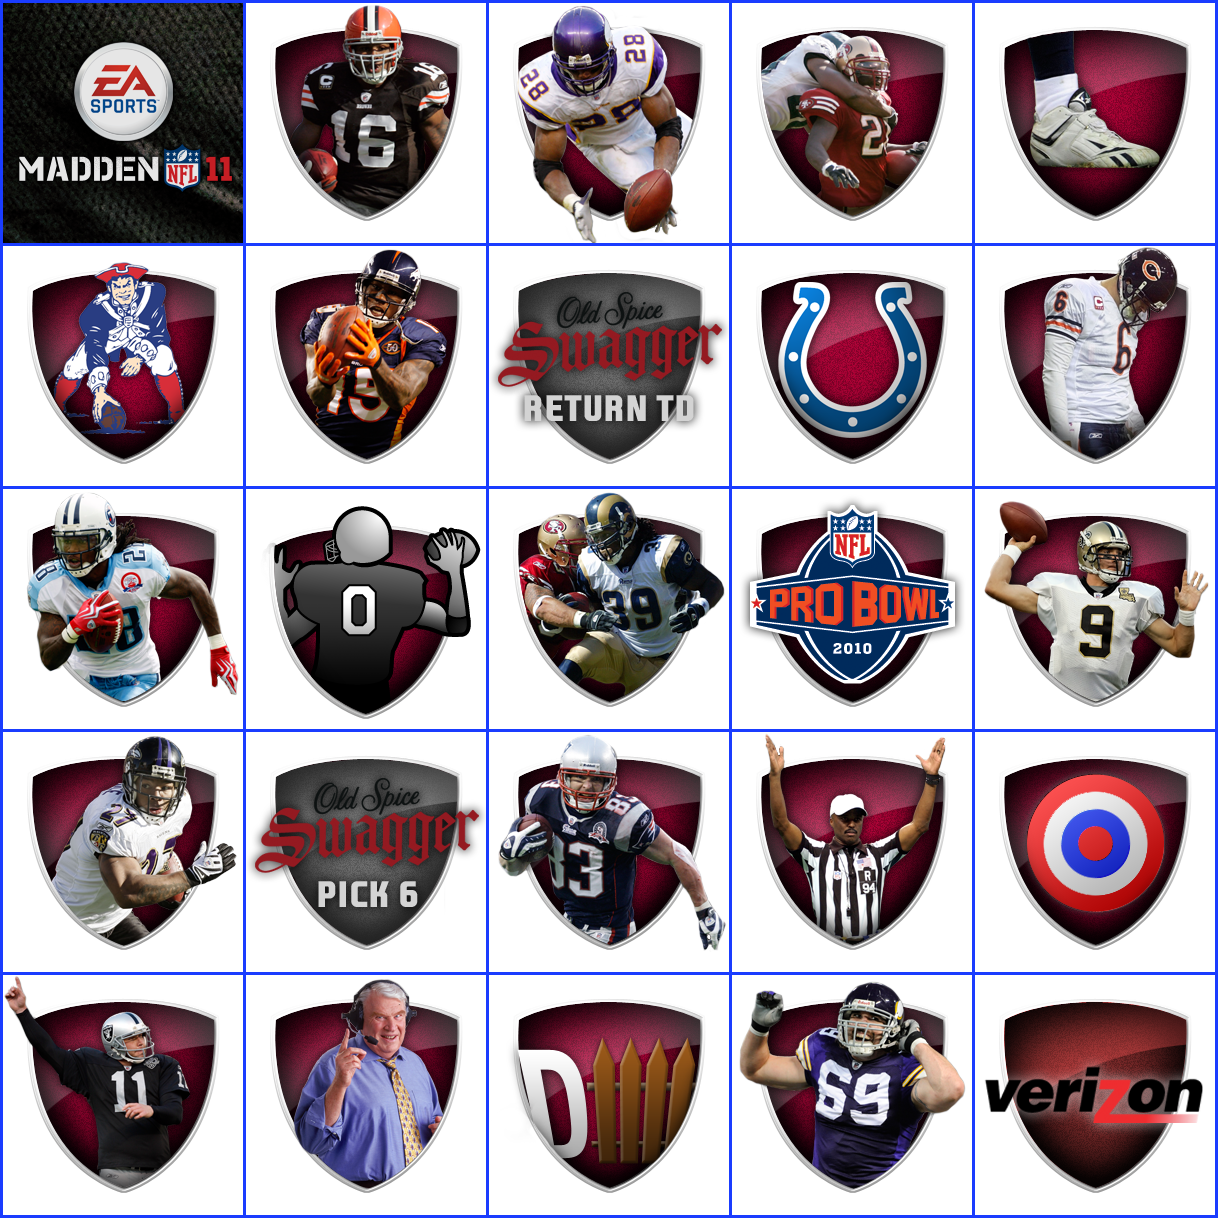 Madden NFL 11 - Trophy Icons